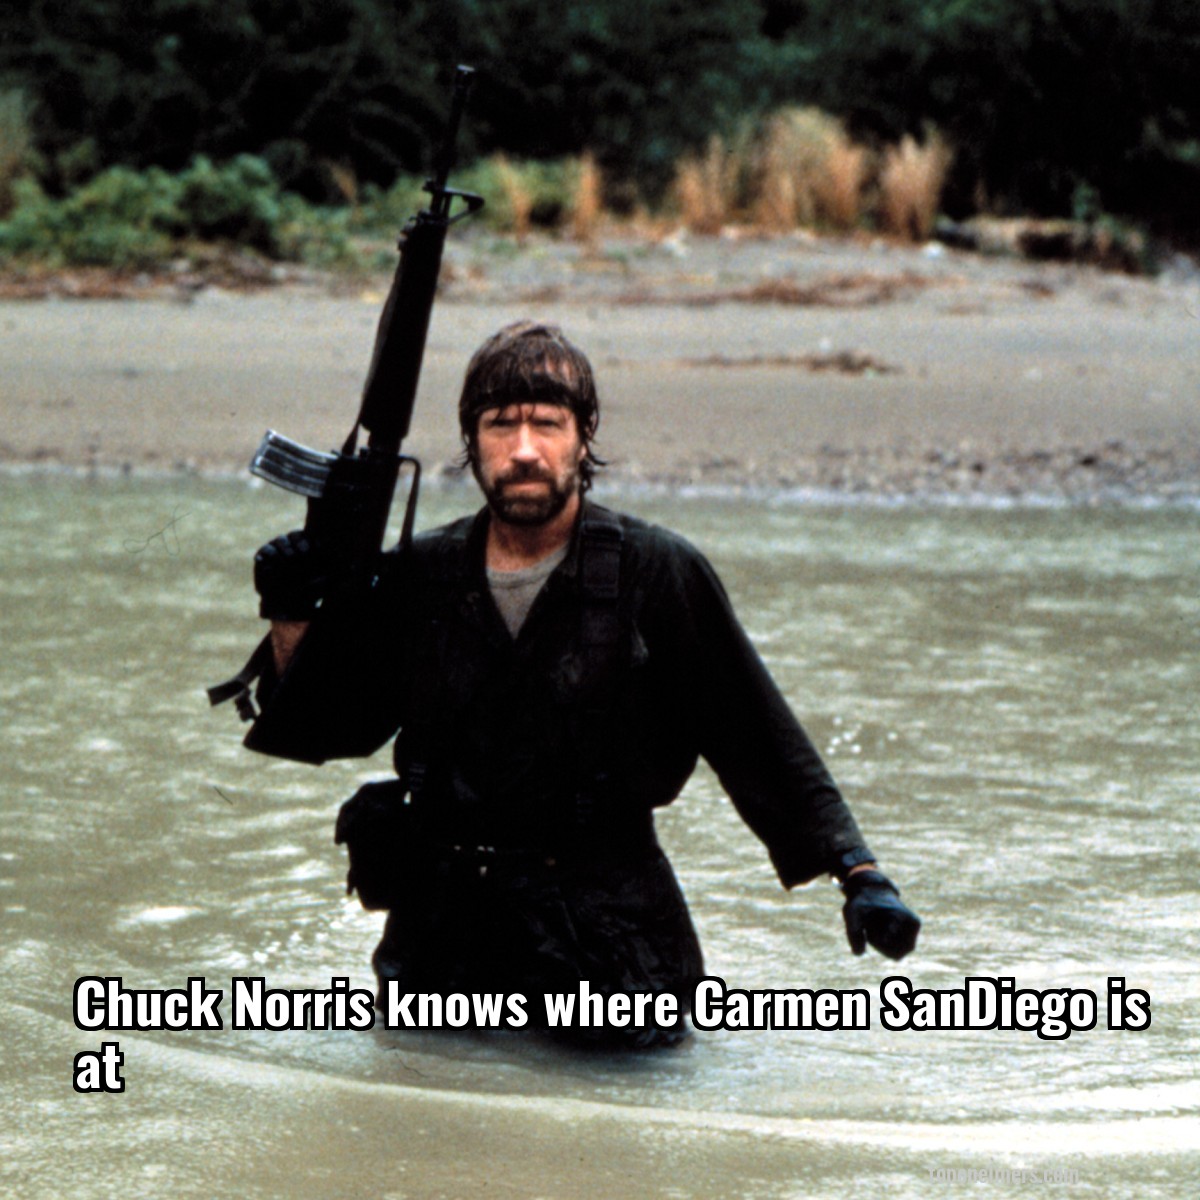 Chuck Norris knows where Carmen SanDiego is at